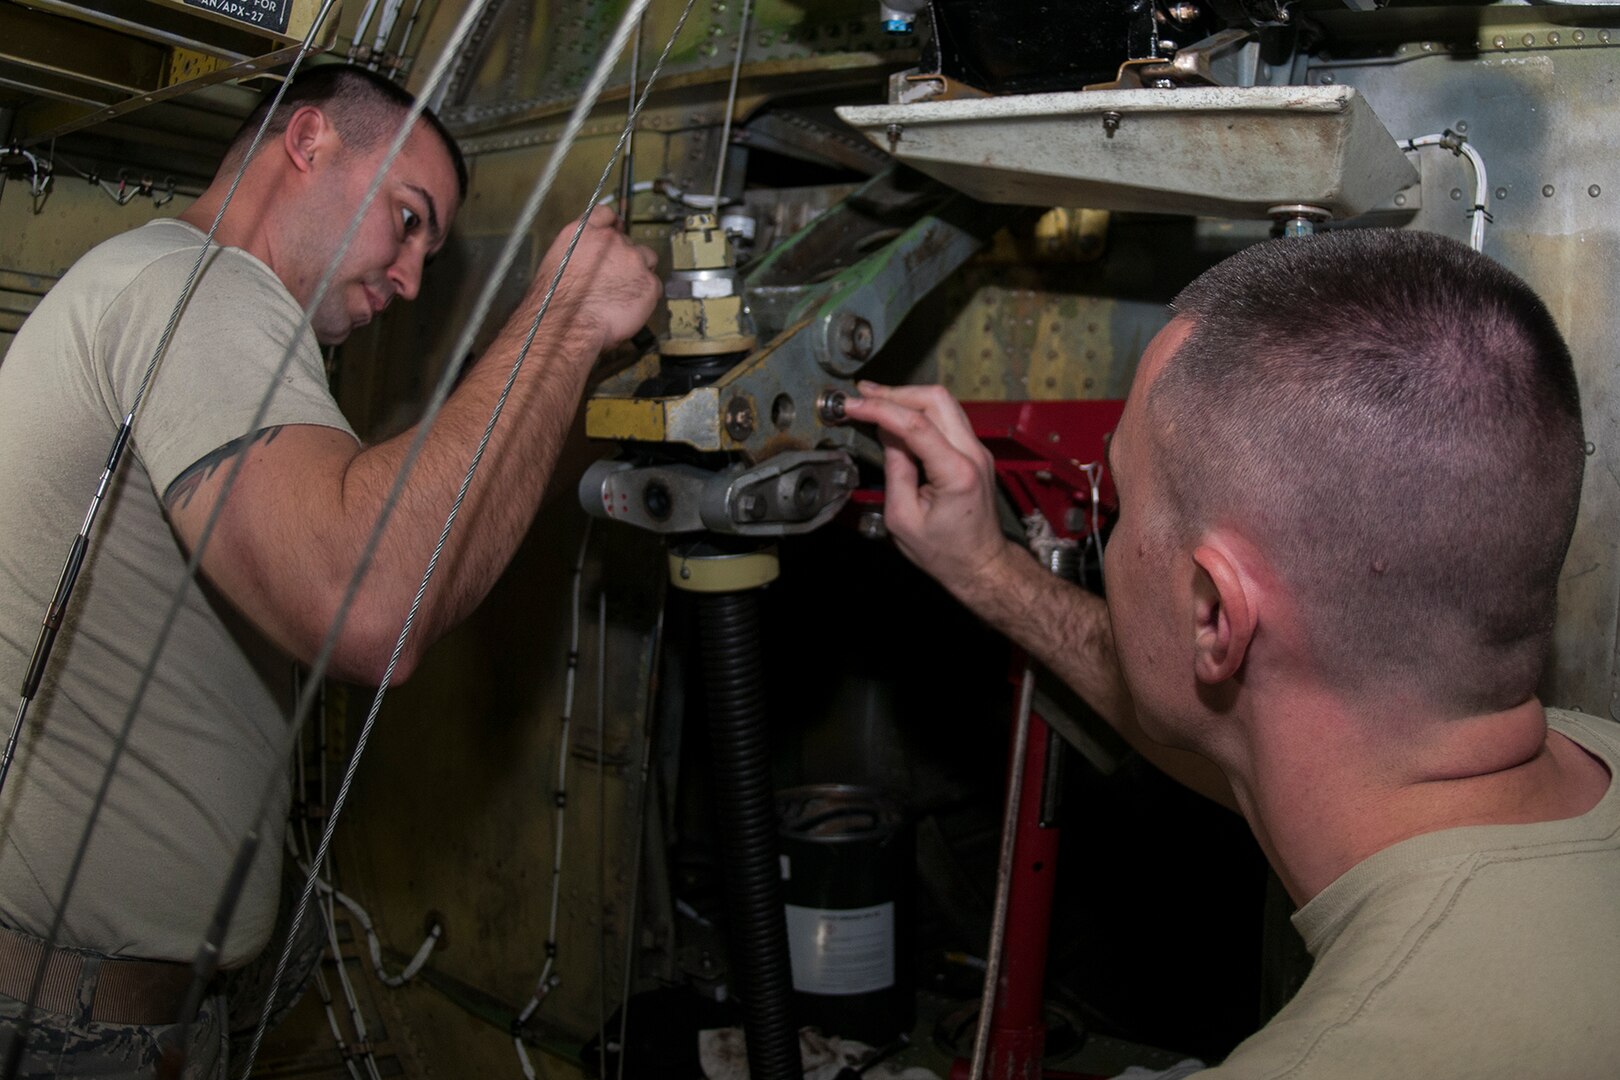 Tech Sgt. Trevor Gray and Master Sgt. Jared Richmond, 434th Maintenance Group repair and reclamation technicians, reinstall a stabilizer trim actuator on Jan. 8, 2017 at Grissom Air Reserve Base, Ind. The actuator is located in a small compartment in the tail of the aircraft often referred to as the “hellhole.” (U.S. Air Force photo/Staff Sgt. Dakota Bergl)